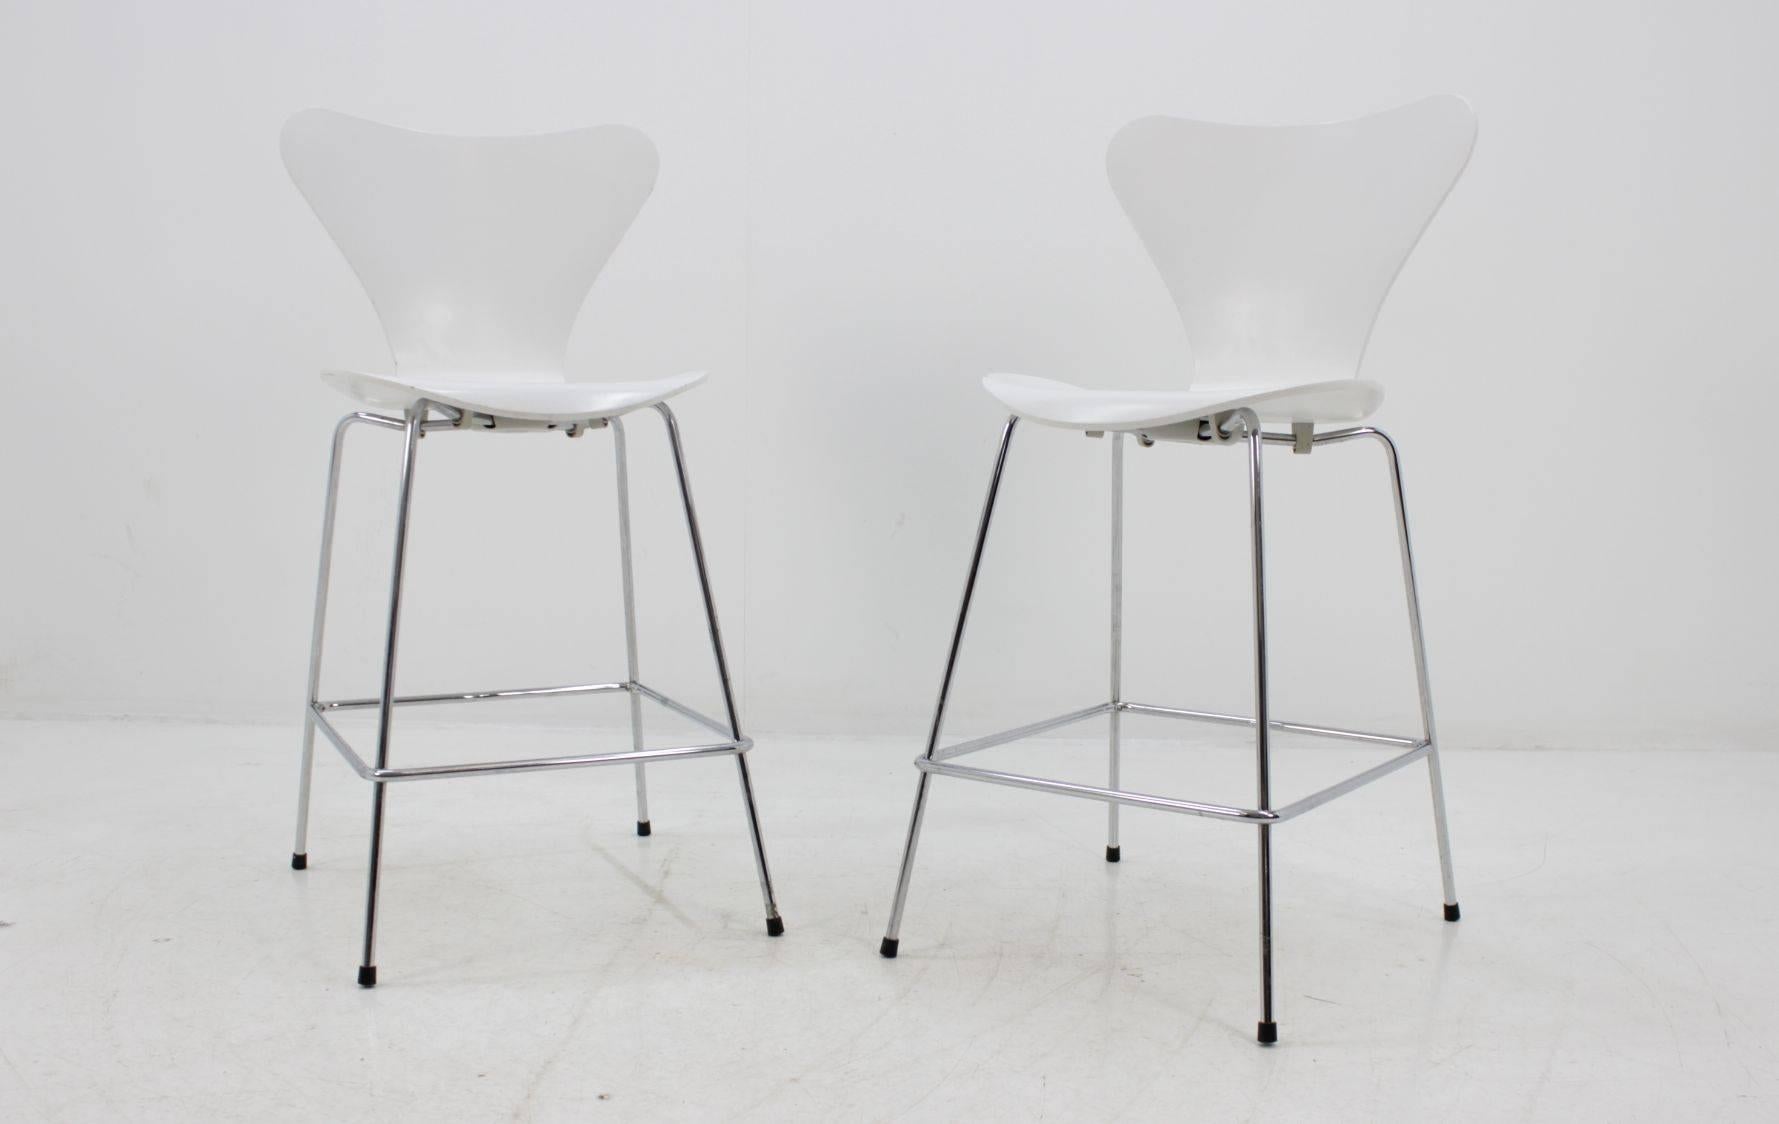 Iconic and elegant stool from production of Fritz Hansen. Designed by Arne Jacobsen.